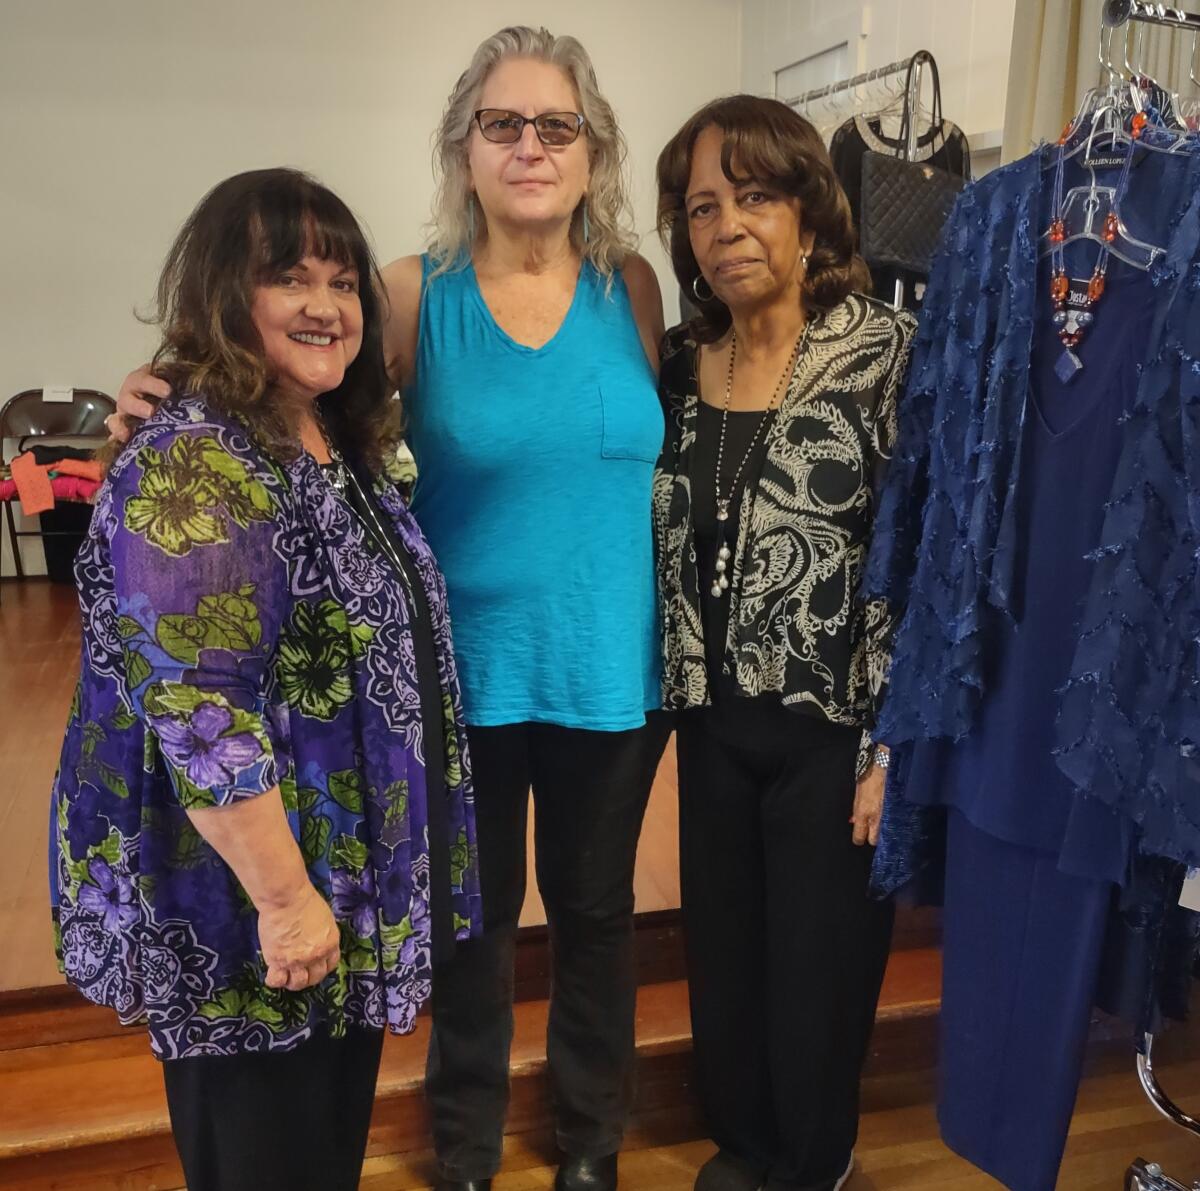 Glamour Girlz Boutique sales women are, from left, Monica Zech, Denise Rich, and boutique owner Peggy Harris.